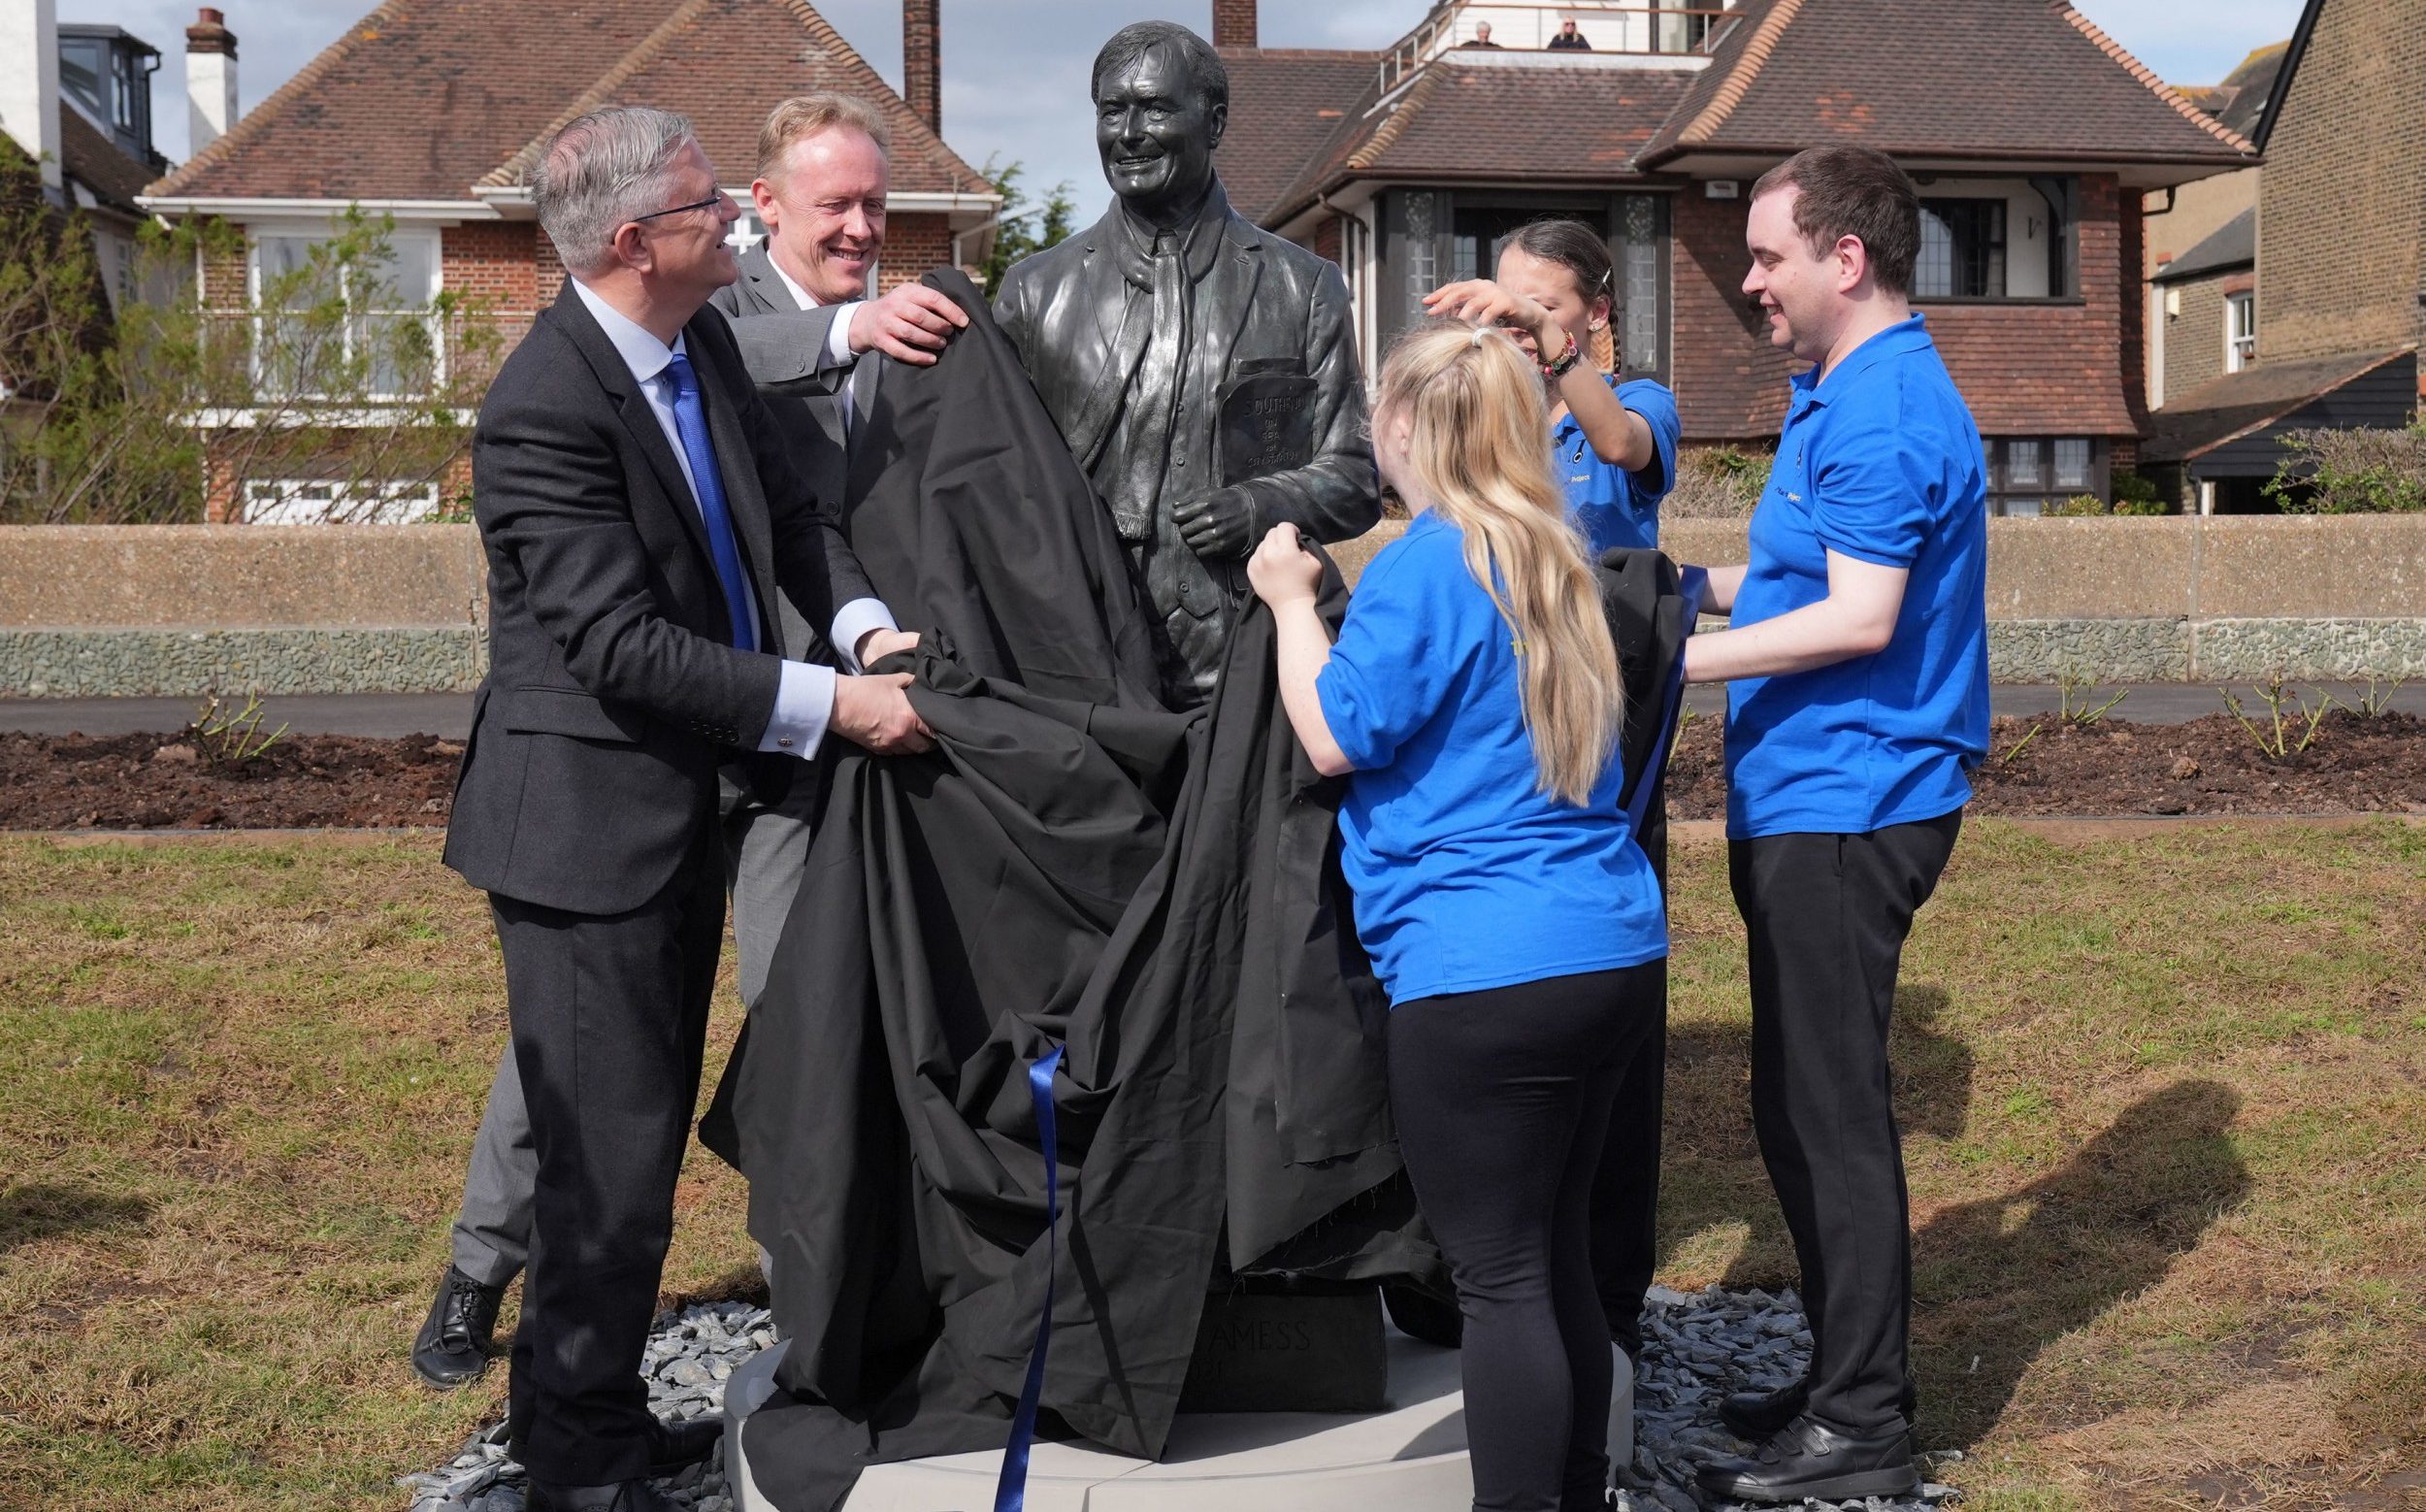 statue of sir david amess unveiled on southend seafront in memory of murdered mp